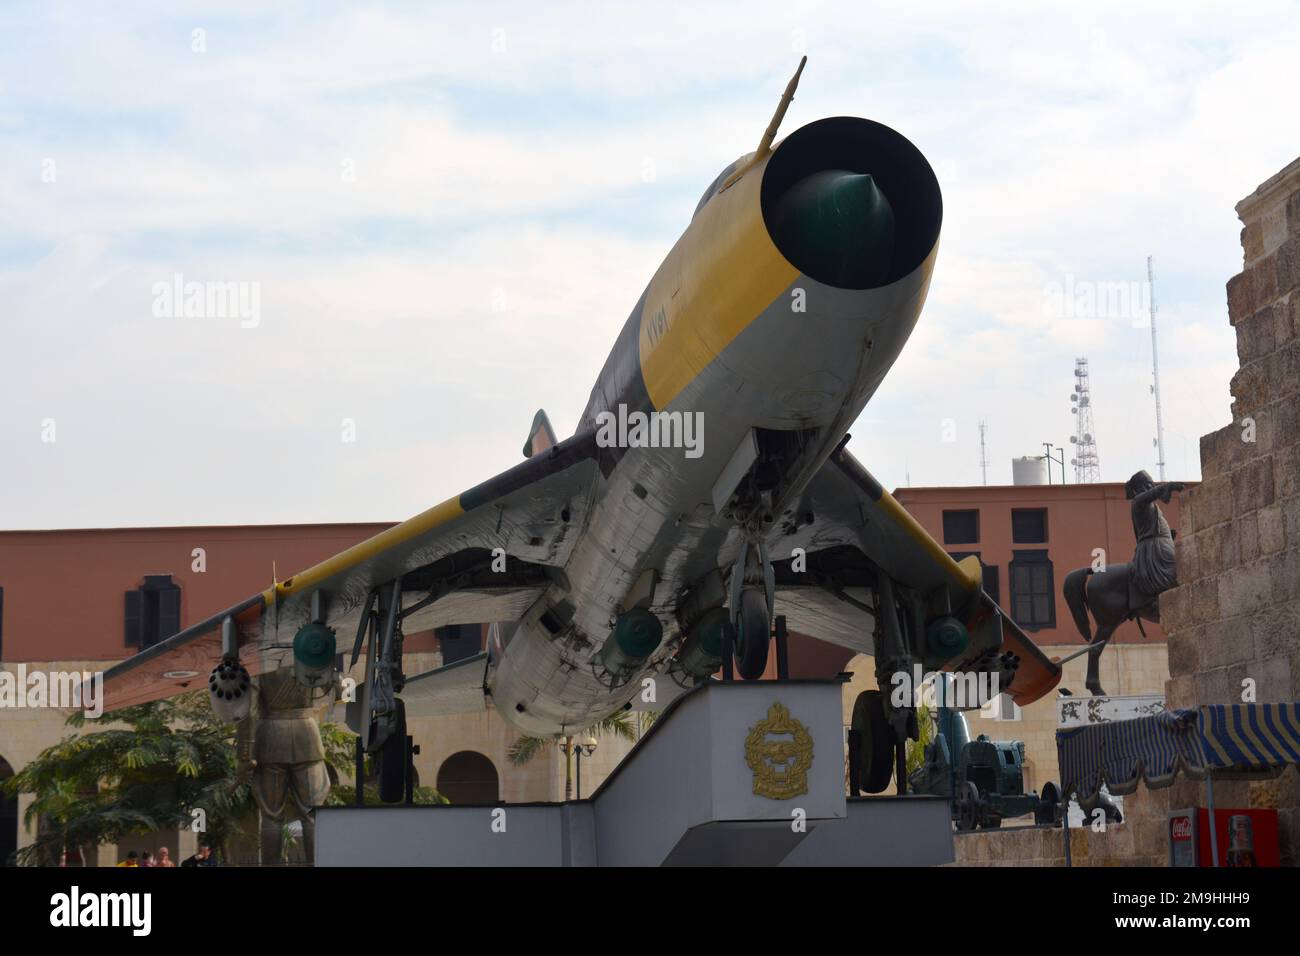 Cairo, Egypt, January 7 2023: USSR Sukhoi 7 fighter bomber aircraft used in October 1973 war from the Egyptian national military museum in Cairo citad Stock Photo